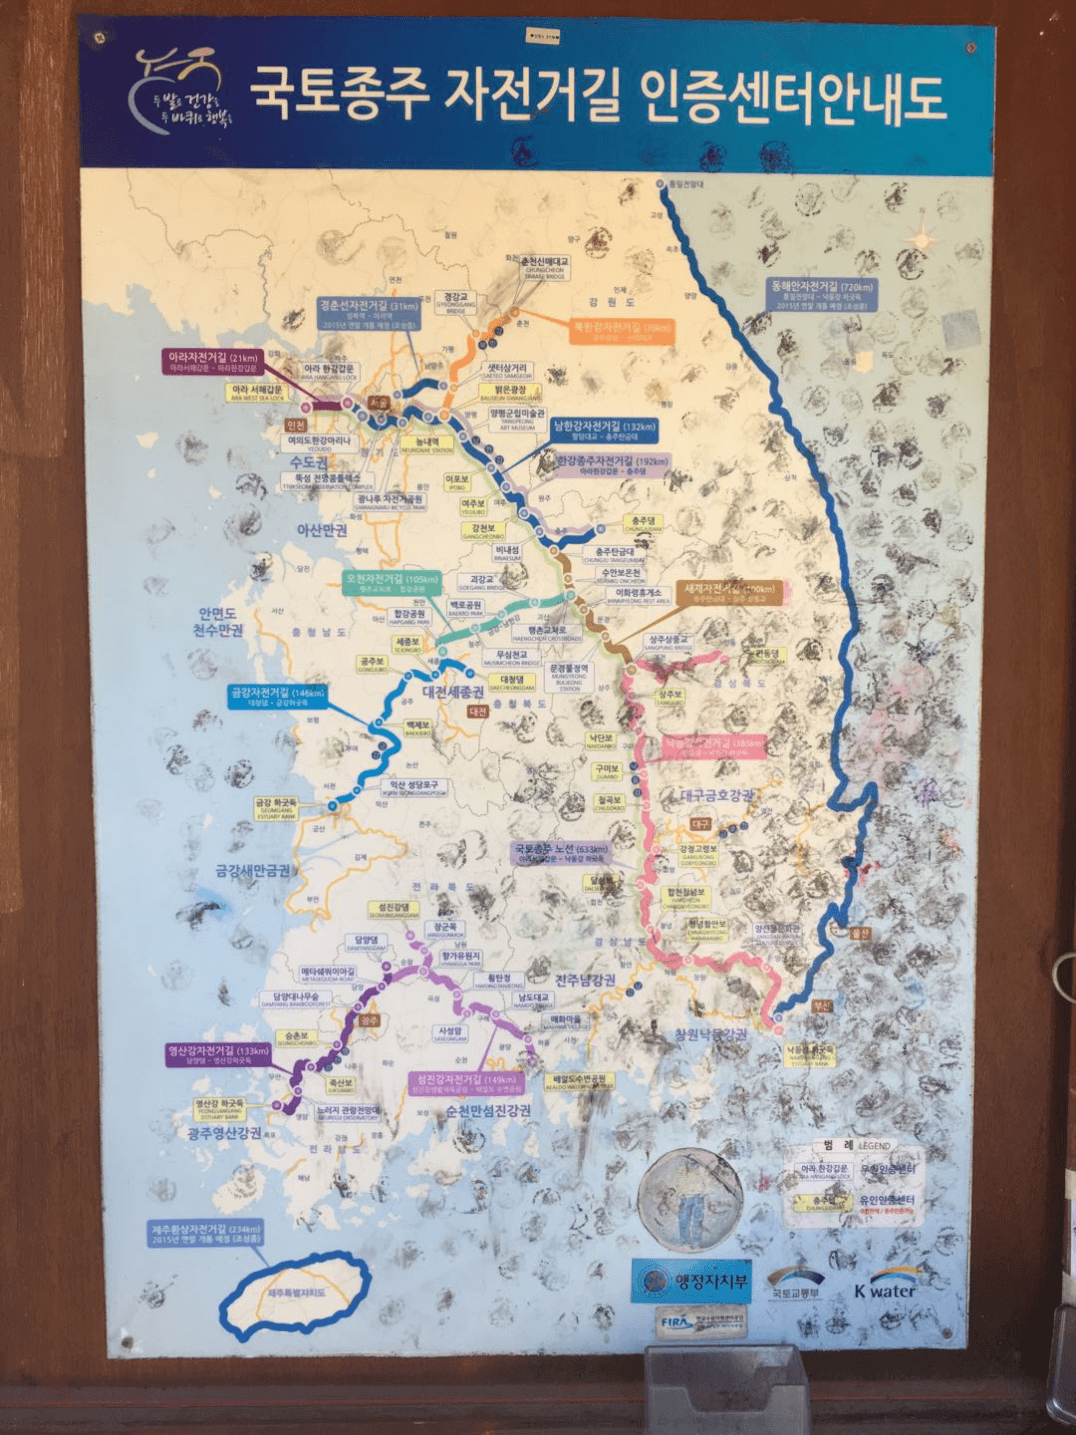 4 Rivers map in South Korea